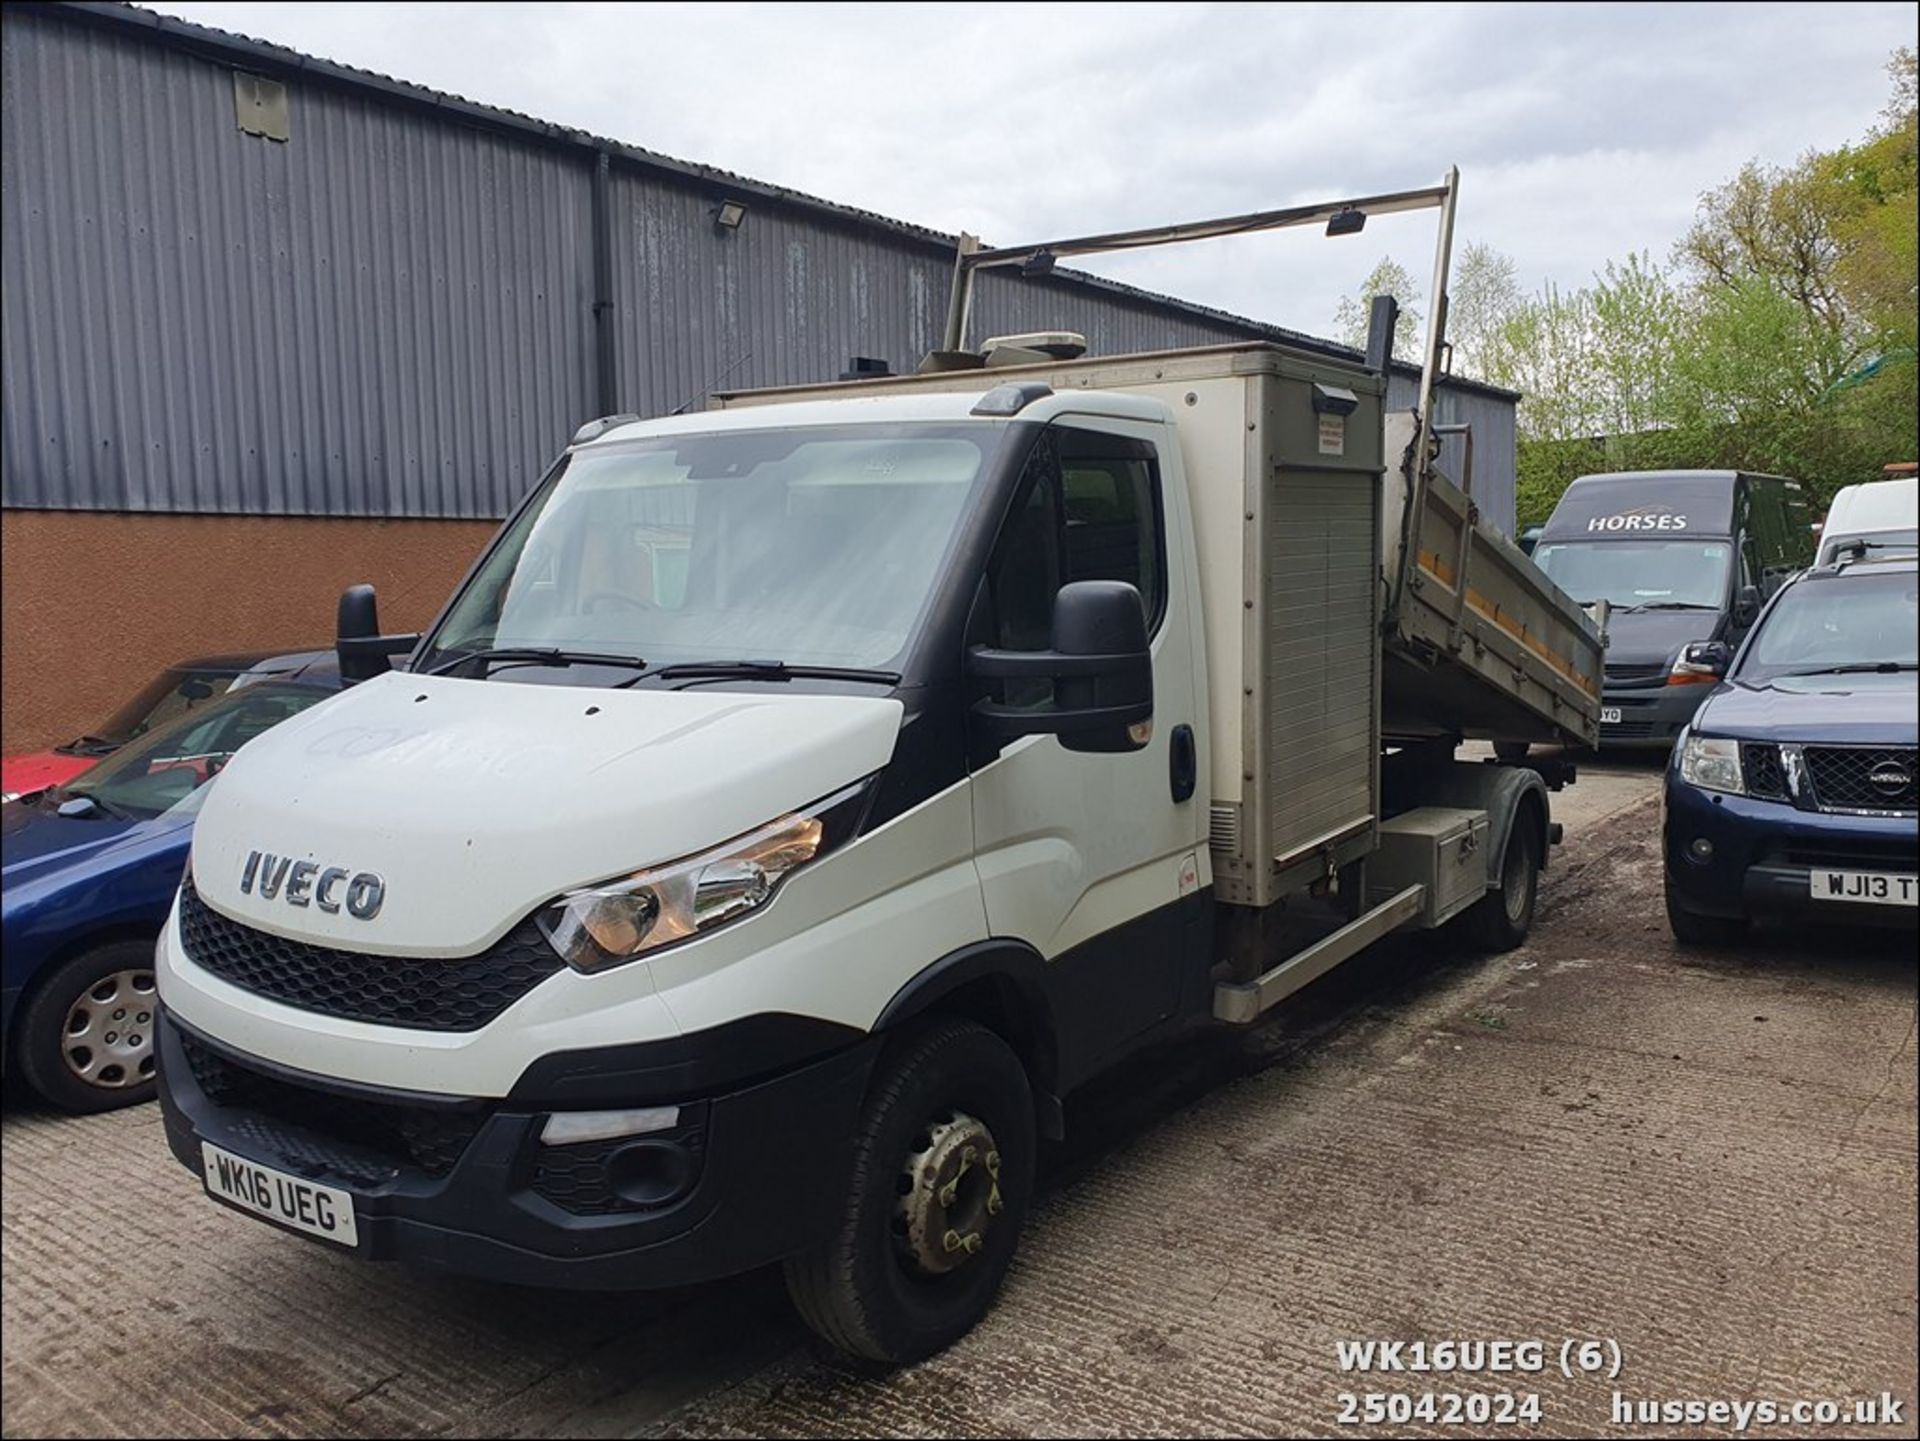 16/16 IVECO DAILY 70C17 - 2998cc 2dr Tipper (White, 193k) - Image 13 of 28